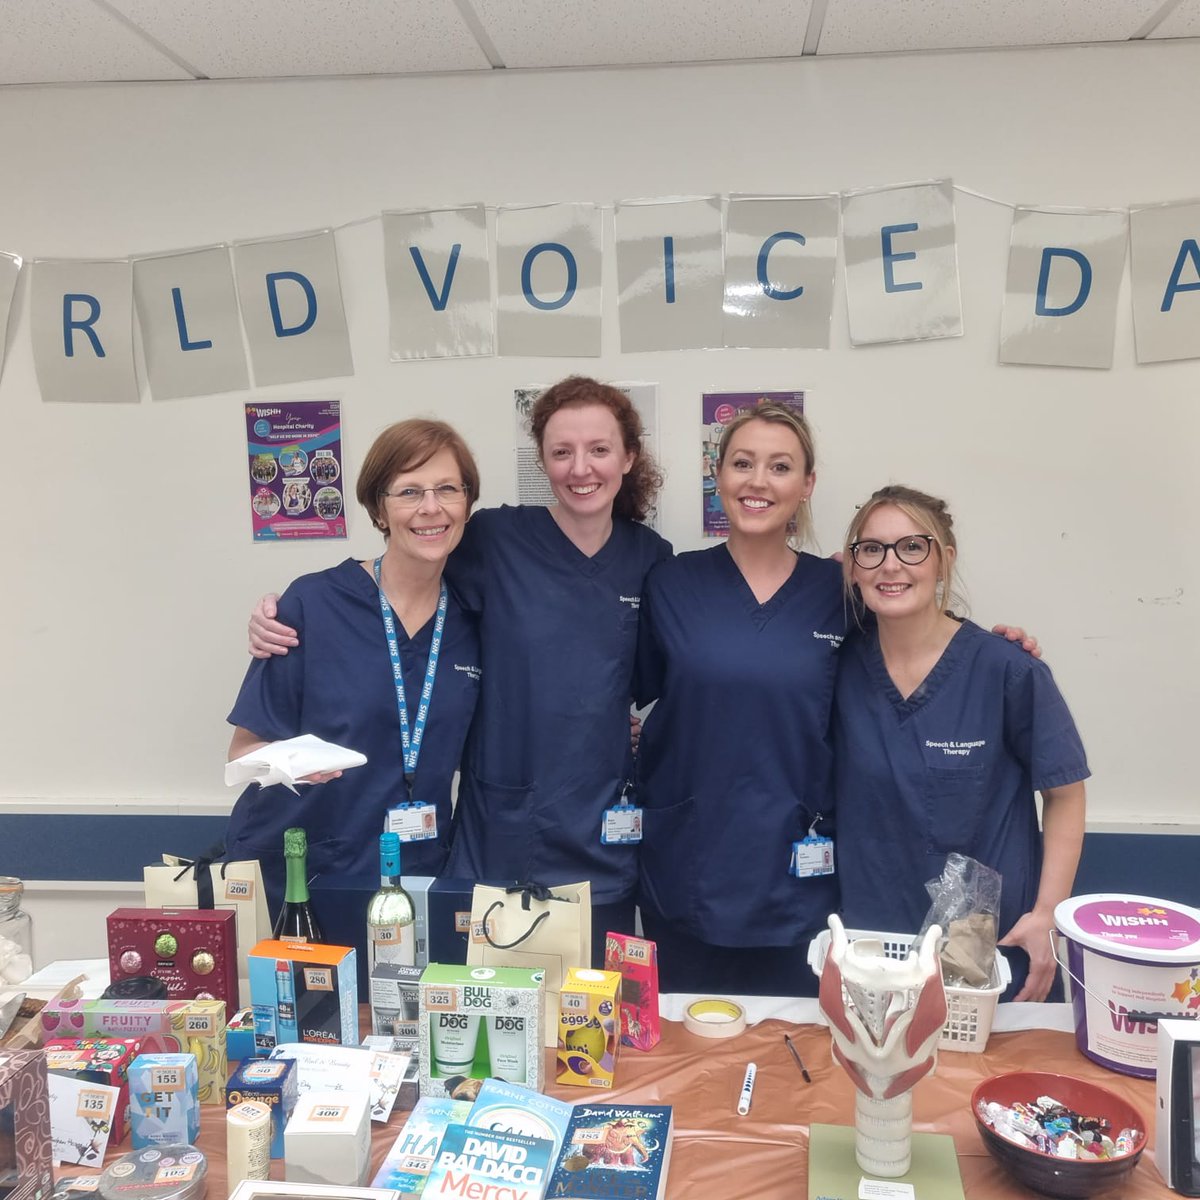 Our lovely voice team celebrating World Voice Day on Tuesday @HullHospitals ! 🗣️
We had a great day raising funds for wellbeing packs  and educating other staff members and the public about the voice! 
Thanks to all for the support ❤️
@BVAVoice @RCSLT 
#mysltday #slt #rcslt